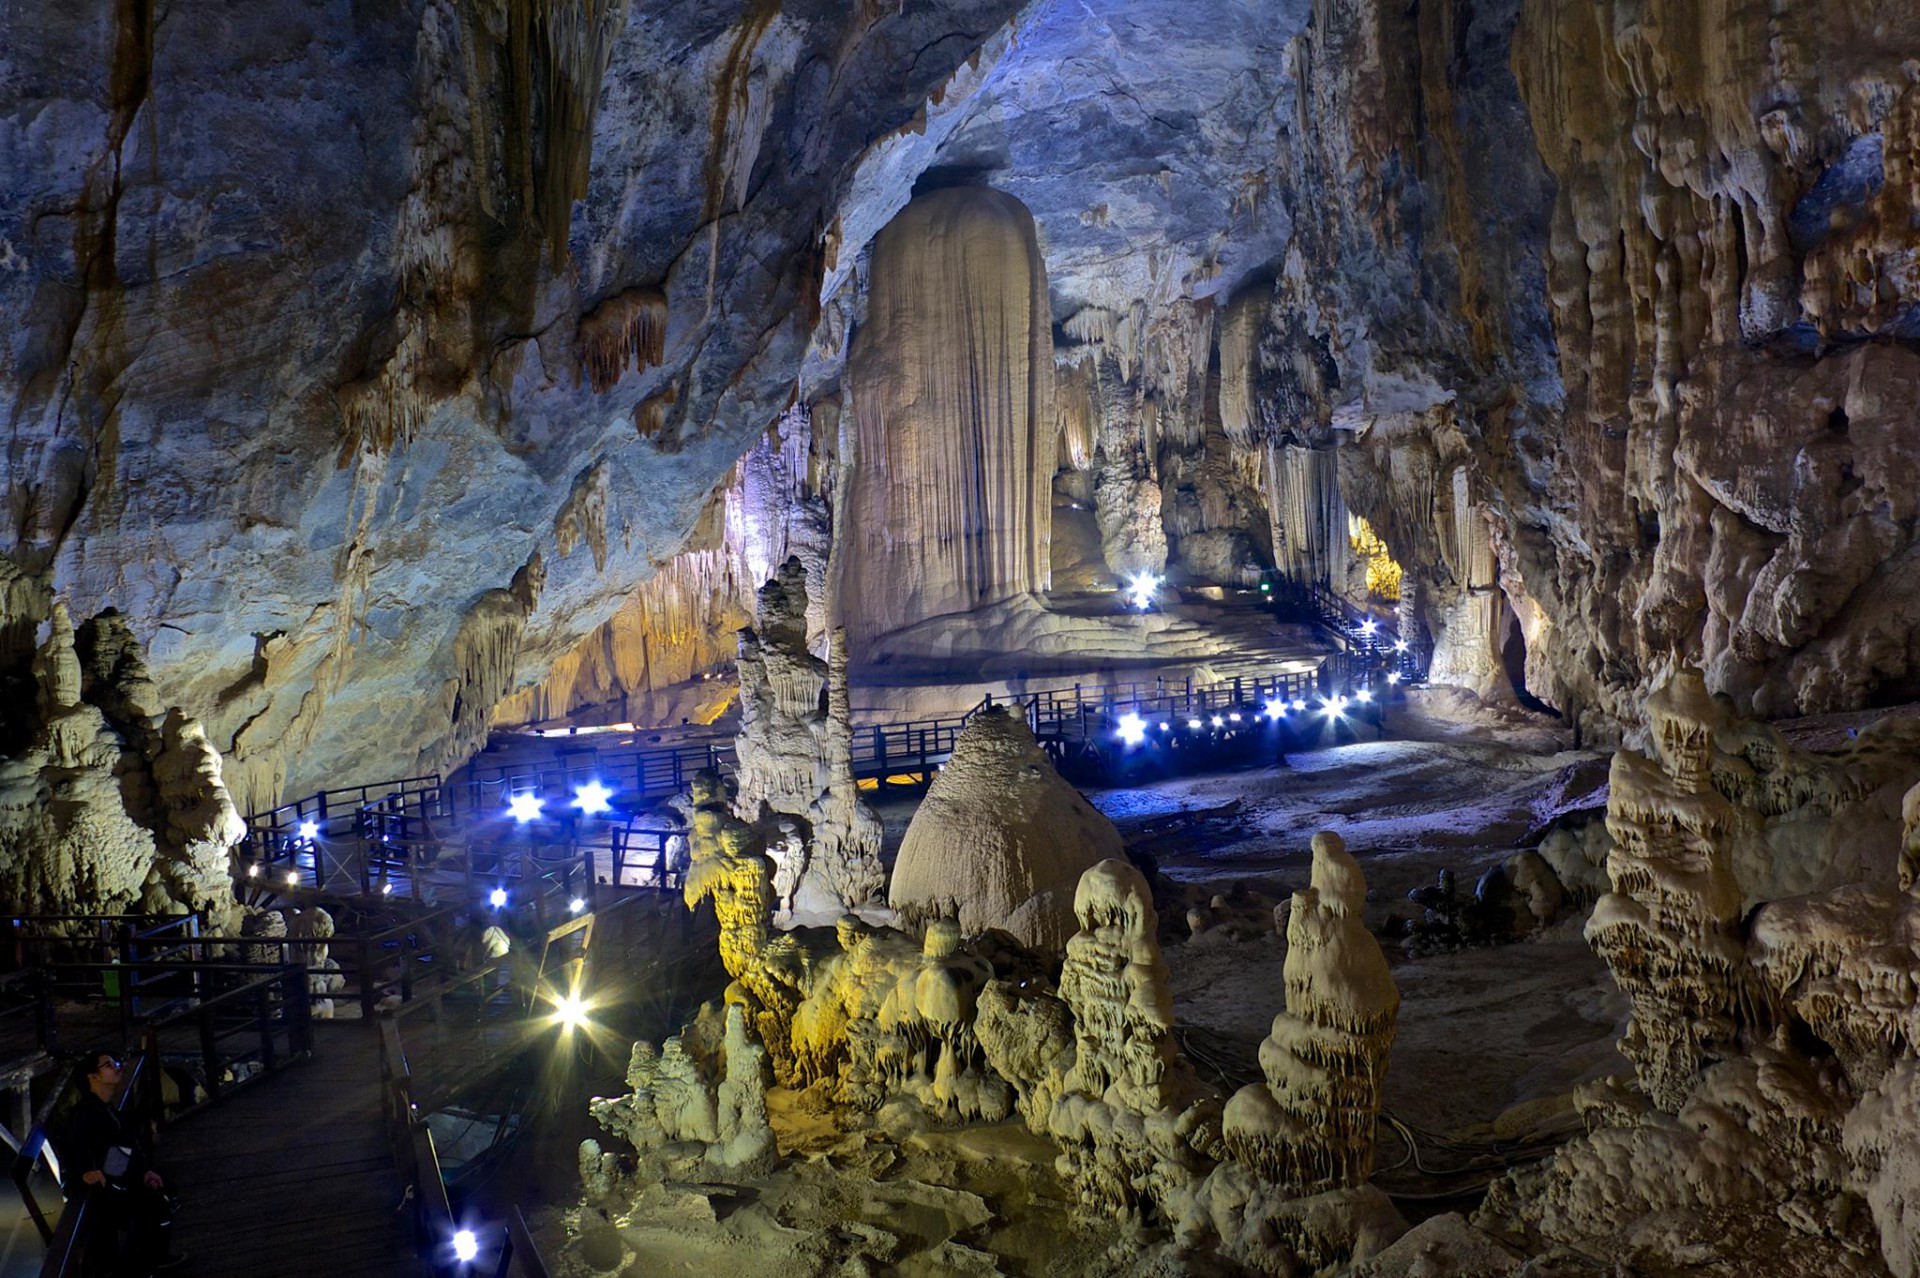 FULL DAY GROUP TOUR: VISIT PARADISE CAVE FROM HUE CITY